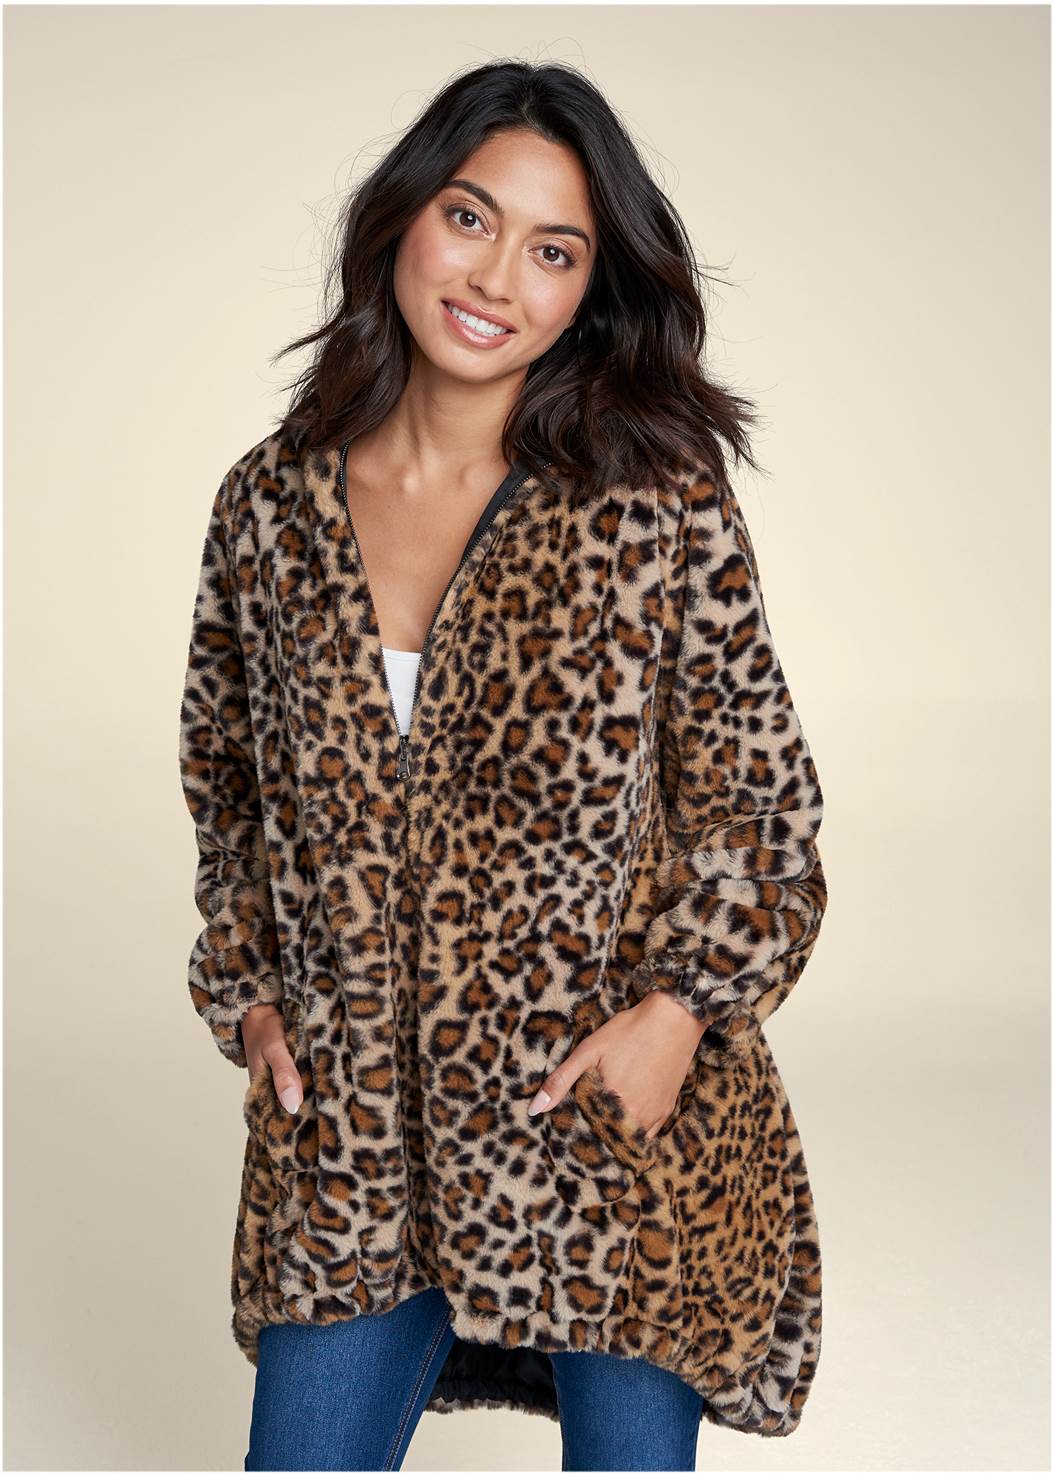 Women's Fur Coats for sale in Chattanooga, Tennessee